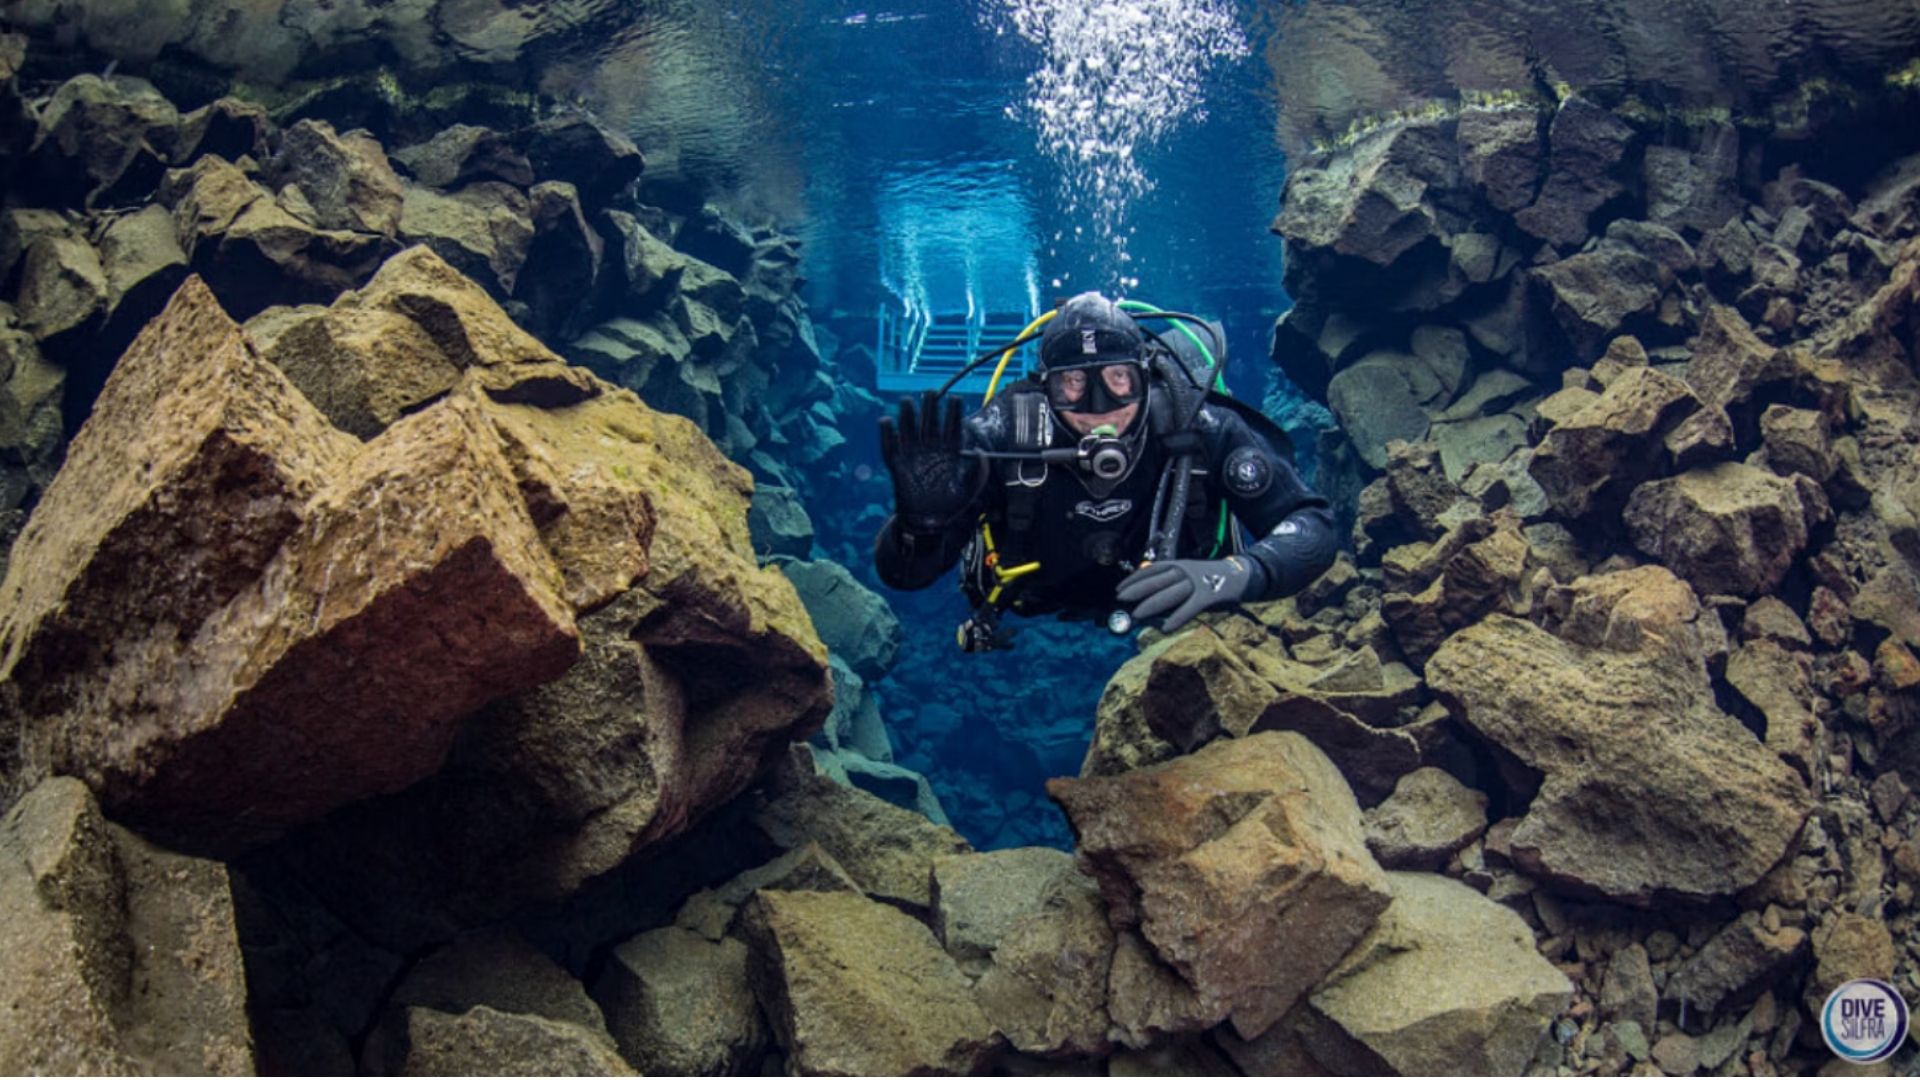 Diving in Silfra is a great activity to do in the Thingvellir National Park in the Golden Circle in Iceland